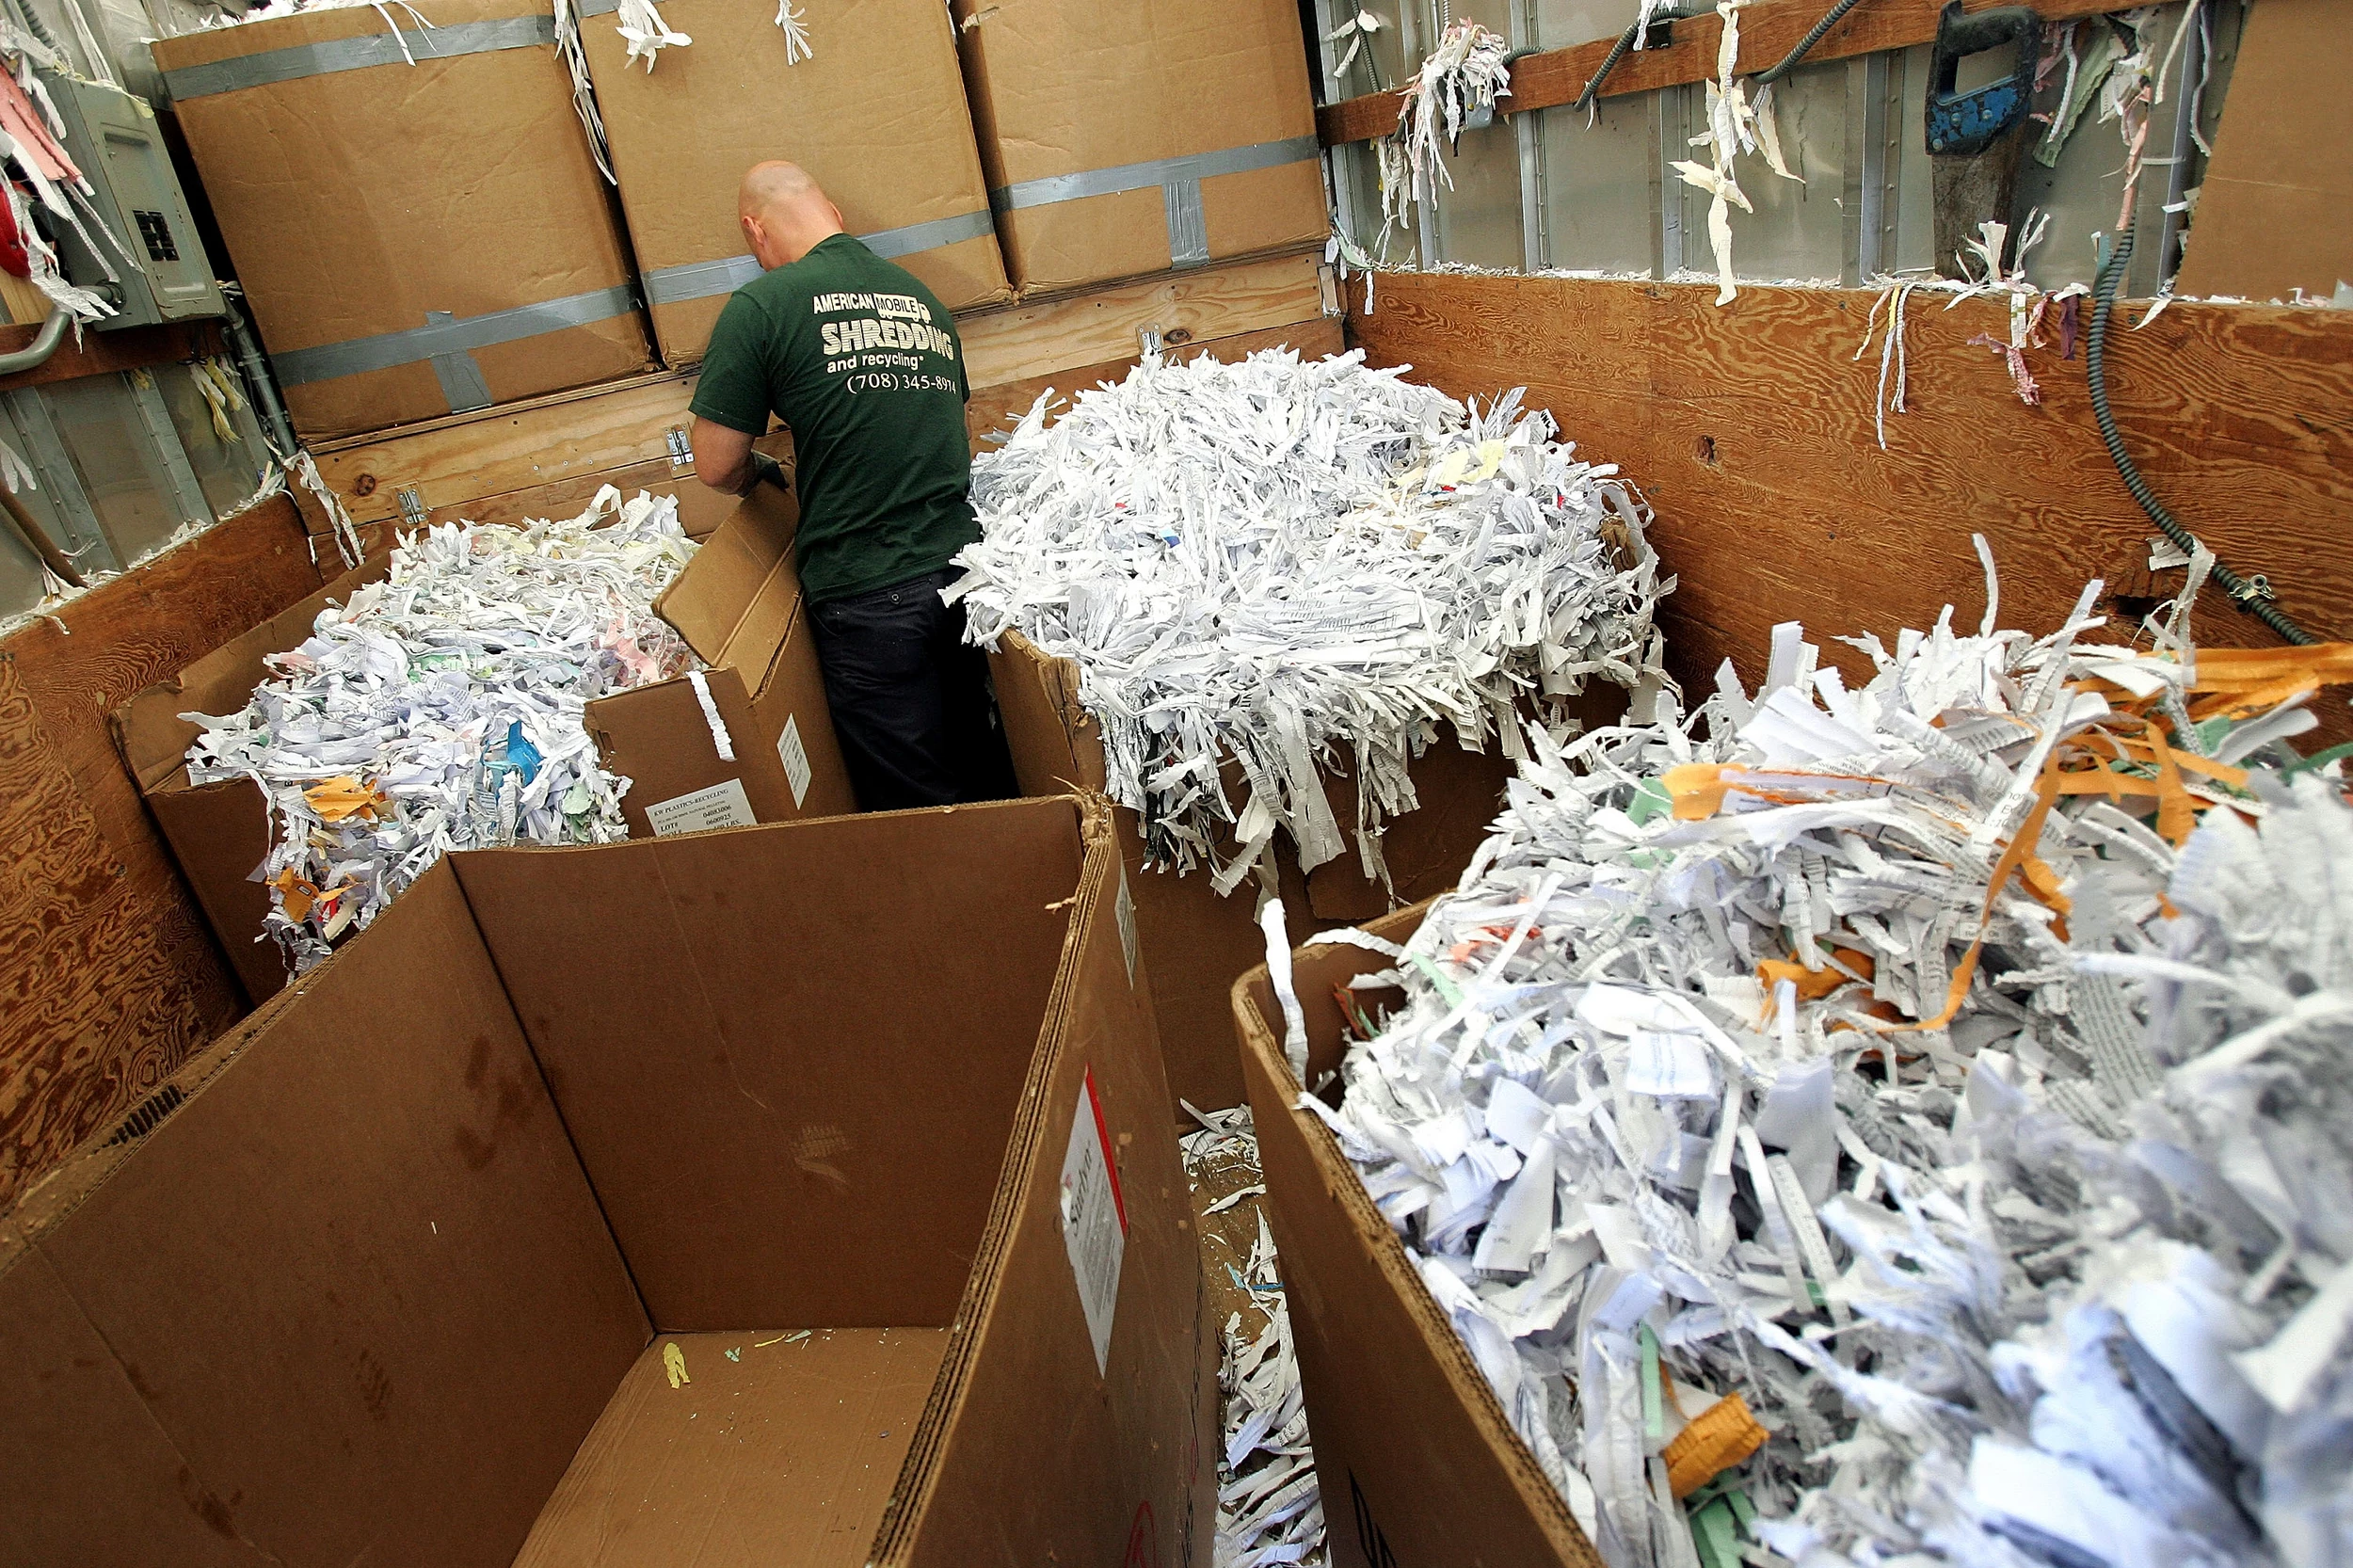 New Consumer Information Law A Boon To Document Shredding Services